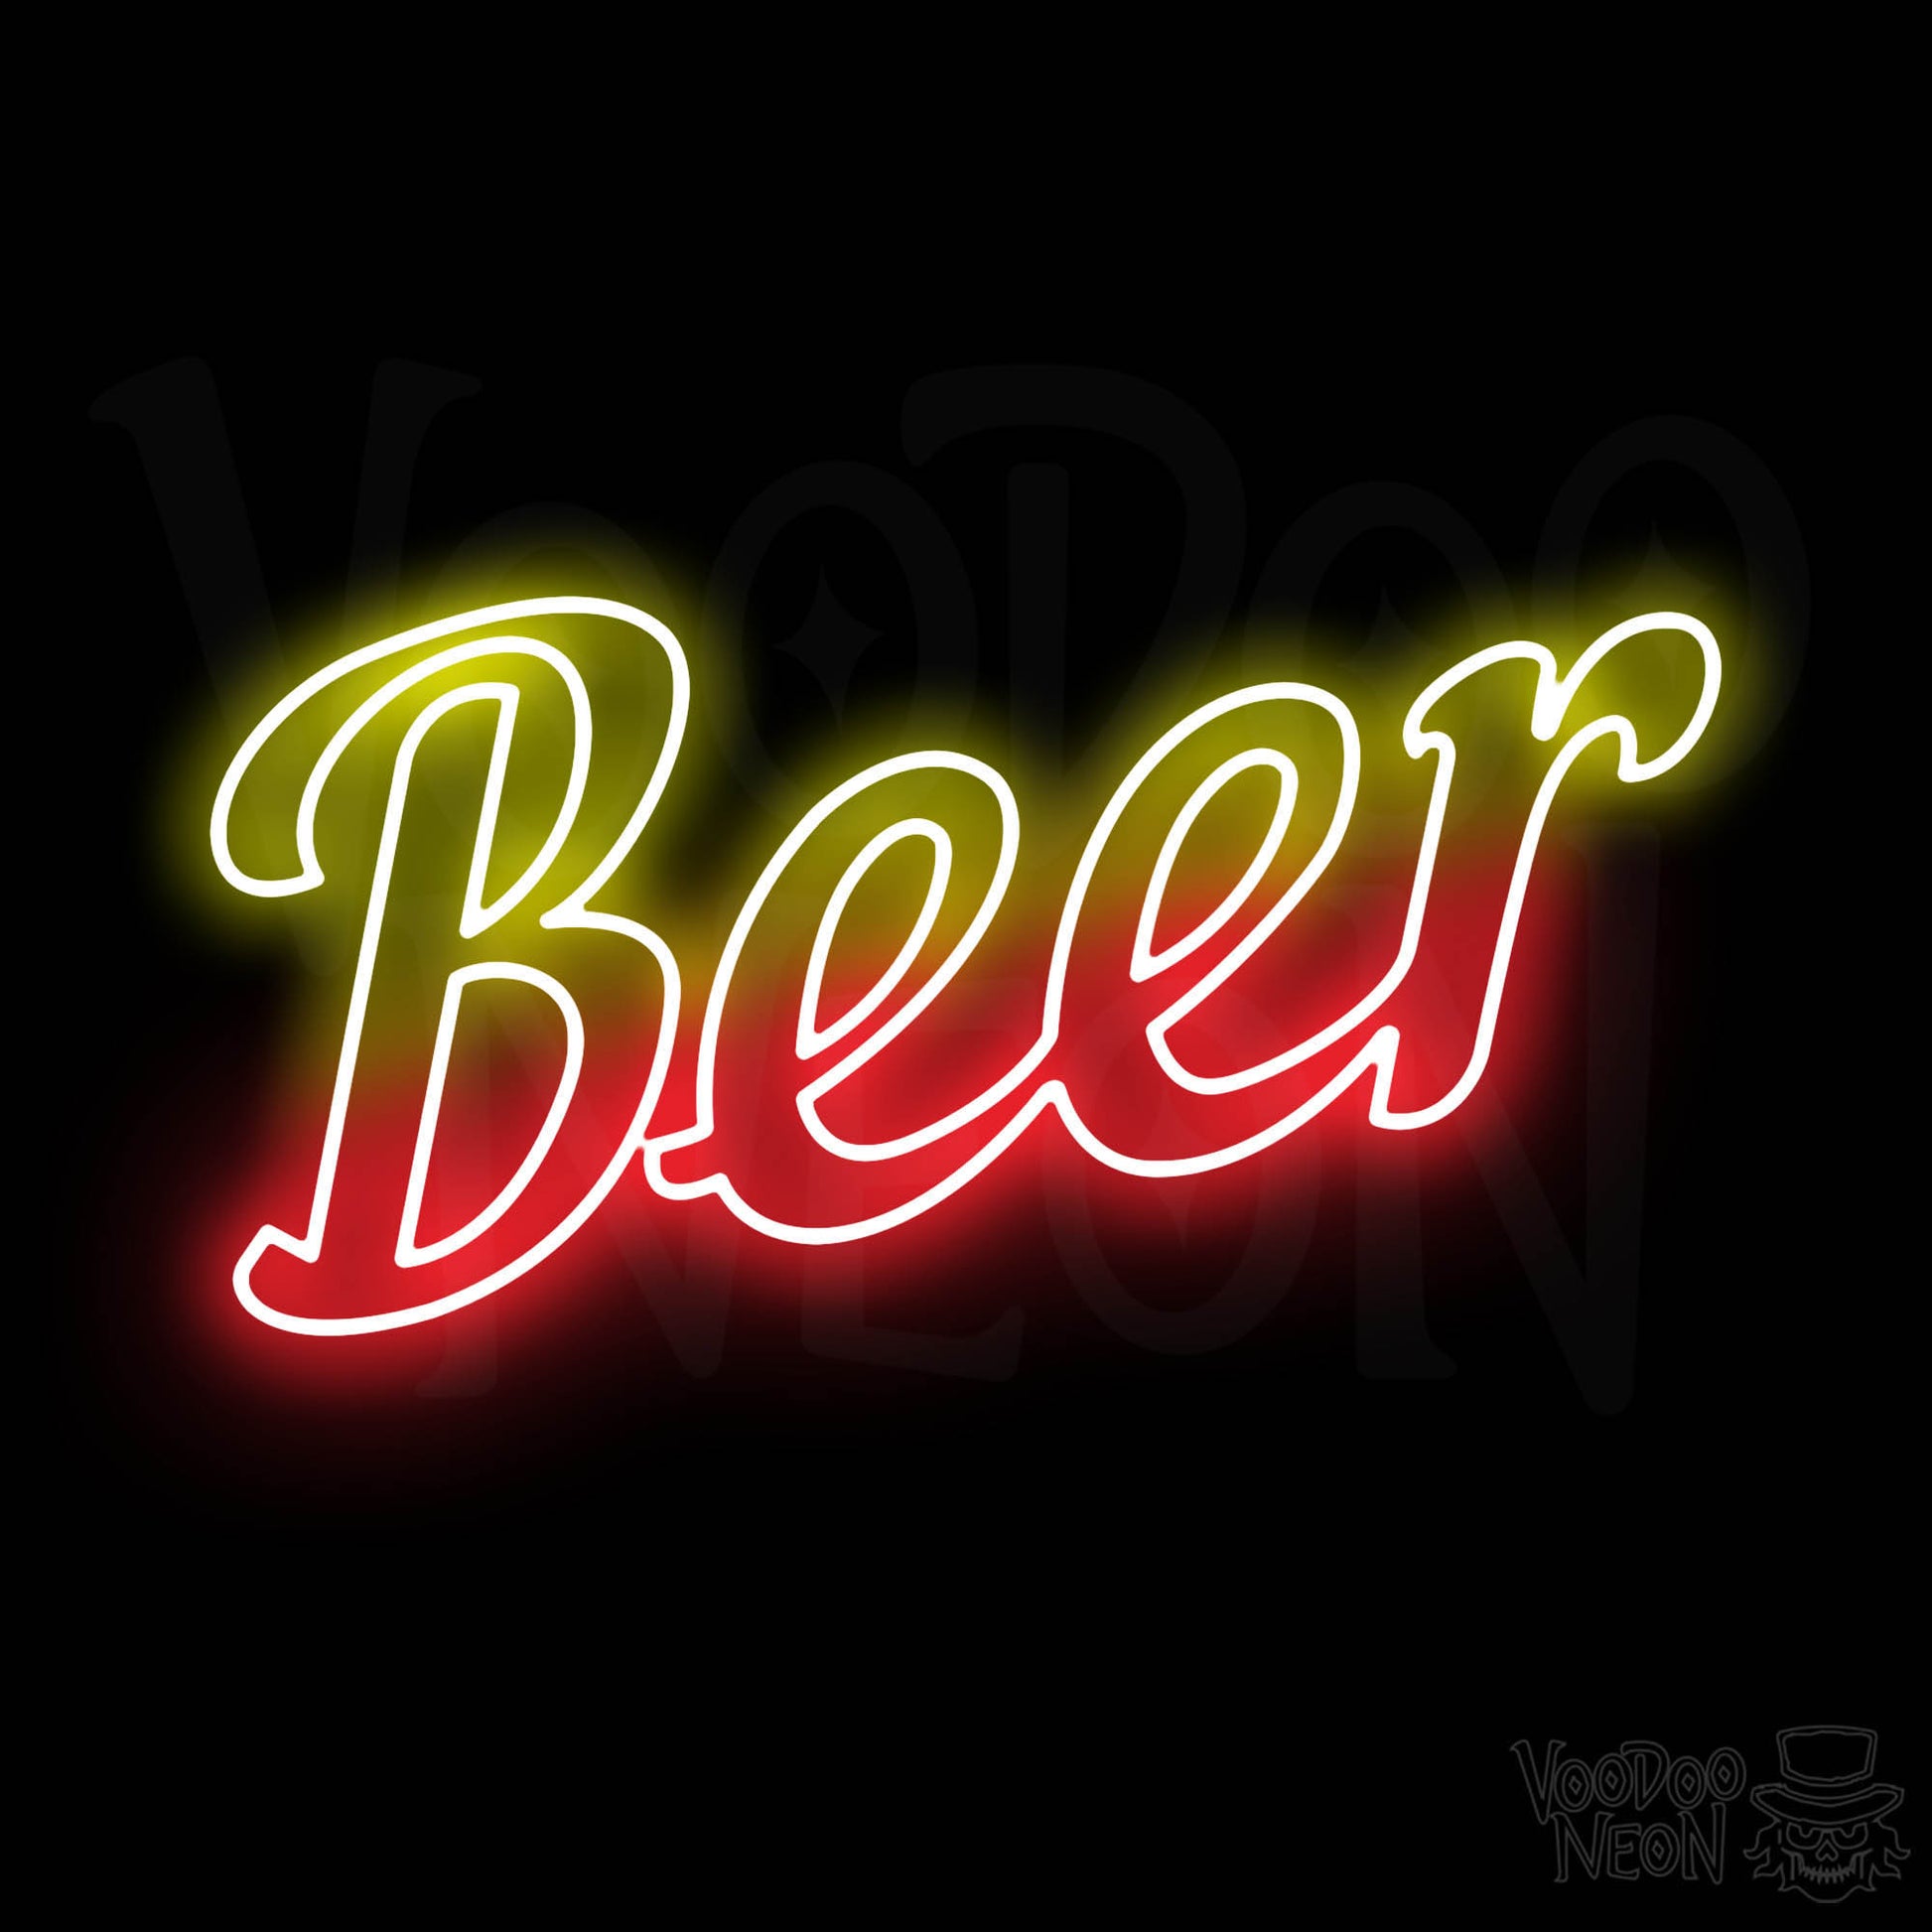 Beer LED Neon - Multi-Color